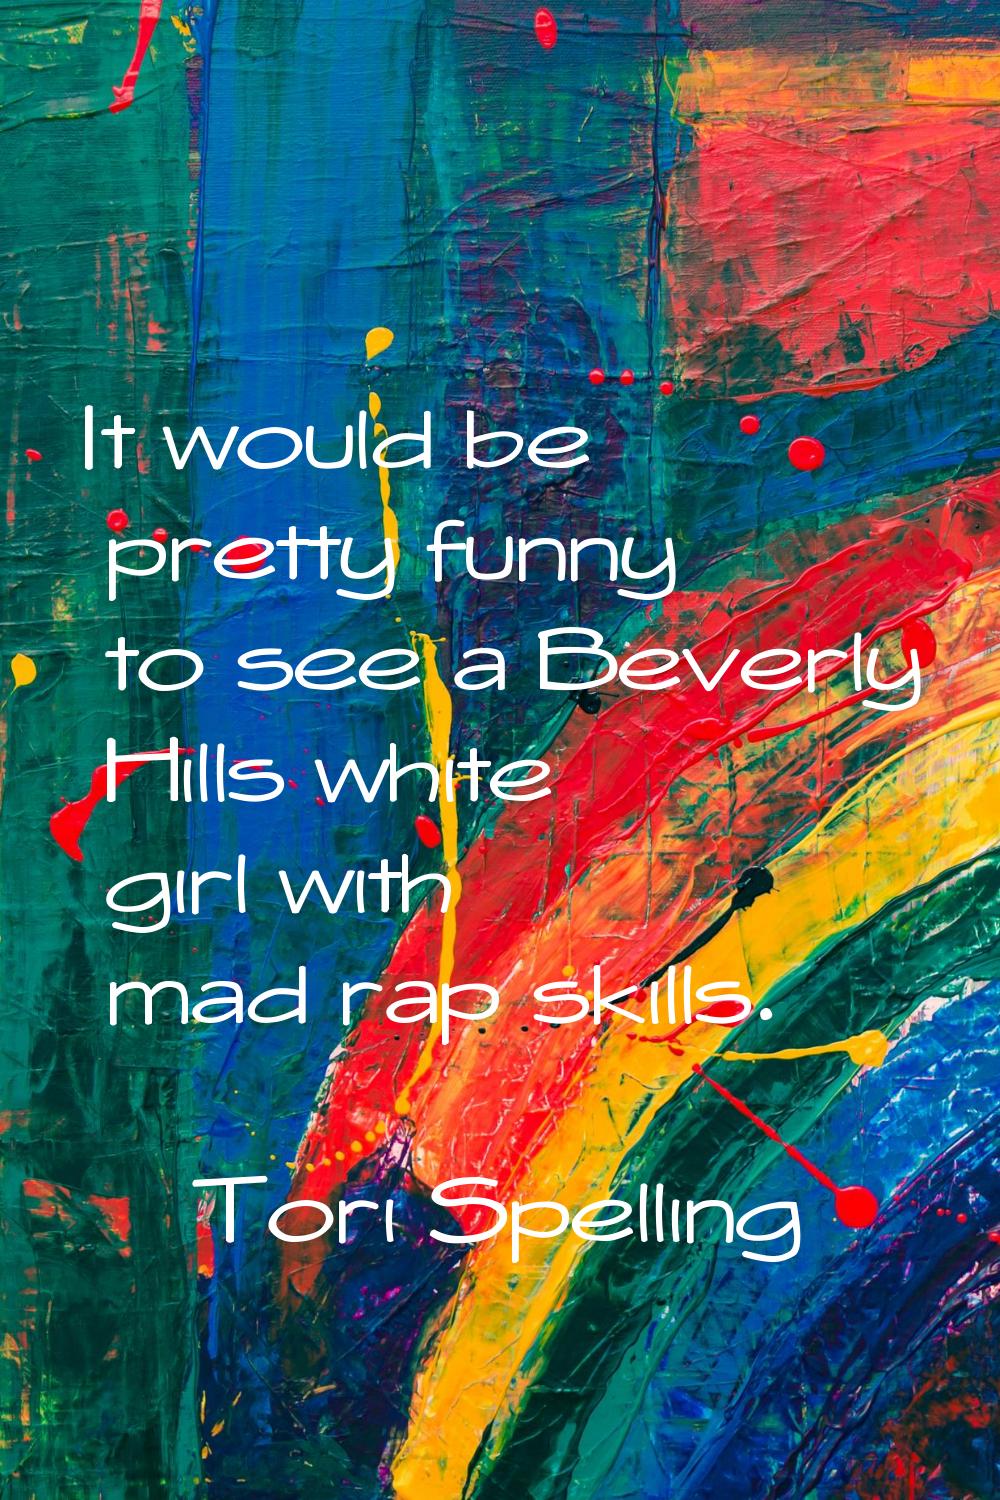 It would be pretty funny to see a Beverly Hills white girl with mad rap skills.